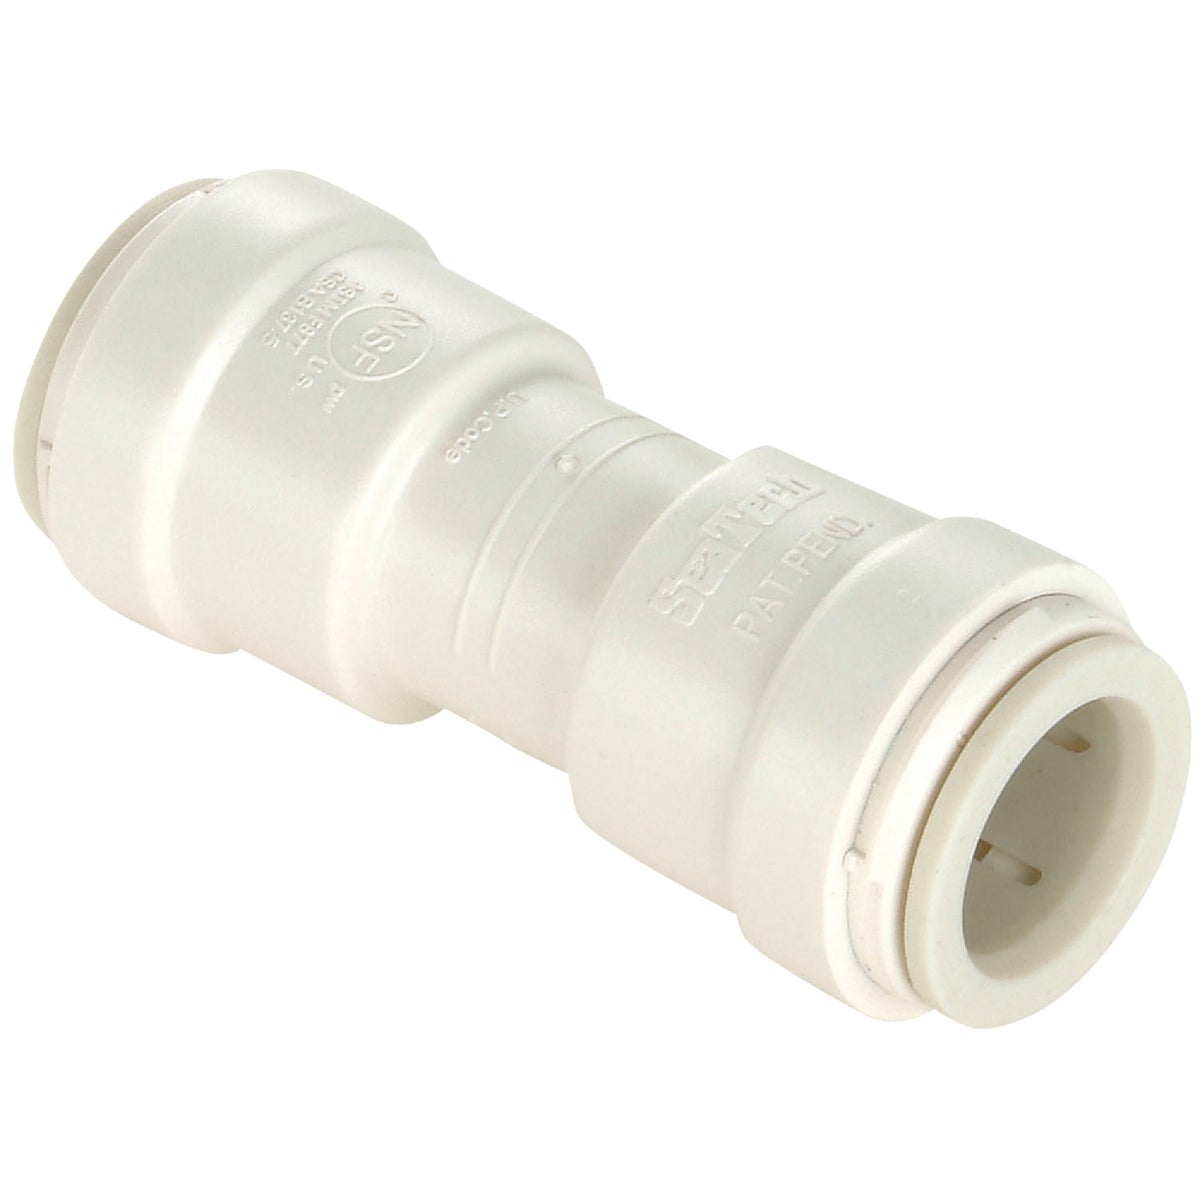 Watts 1/2 In. x 1/2 In. Quick Connect Plastic Coupling